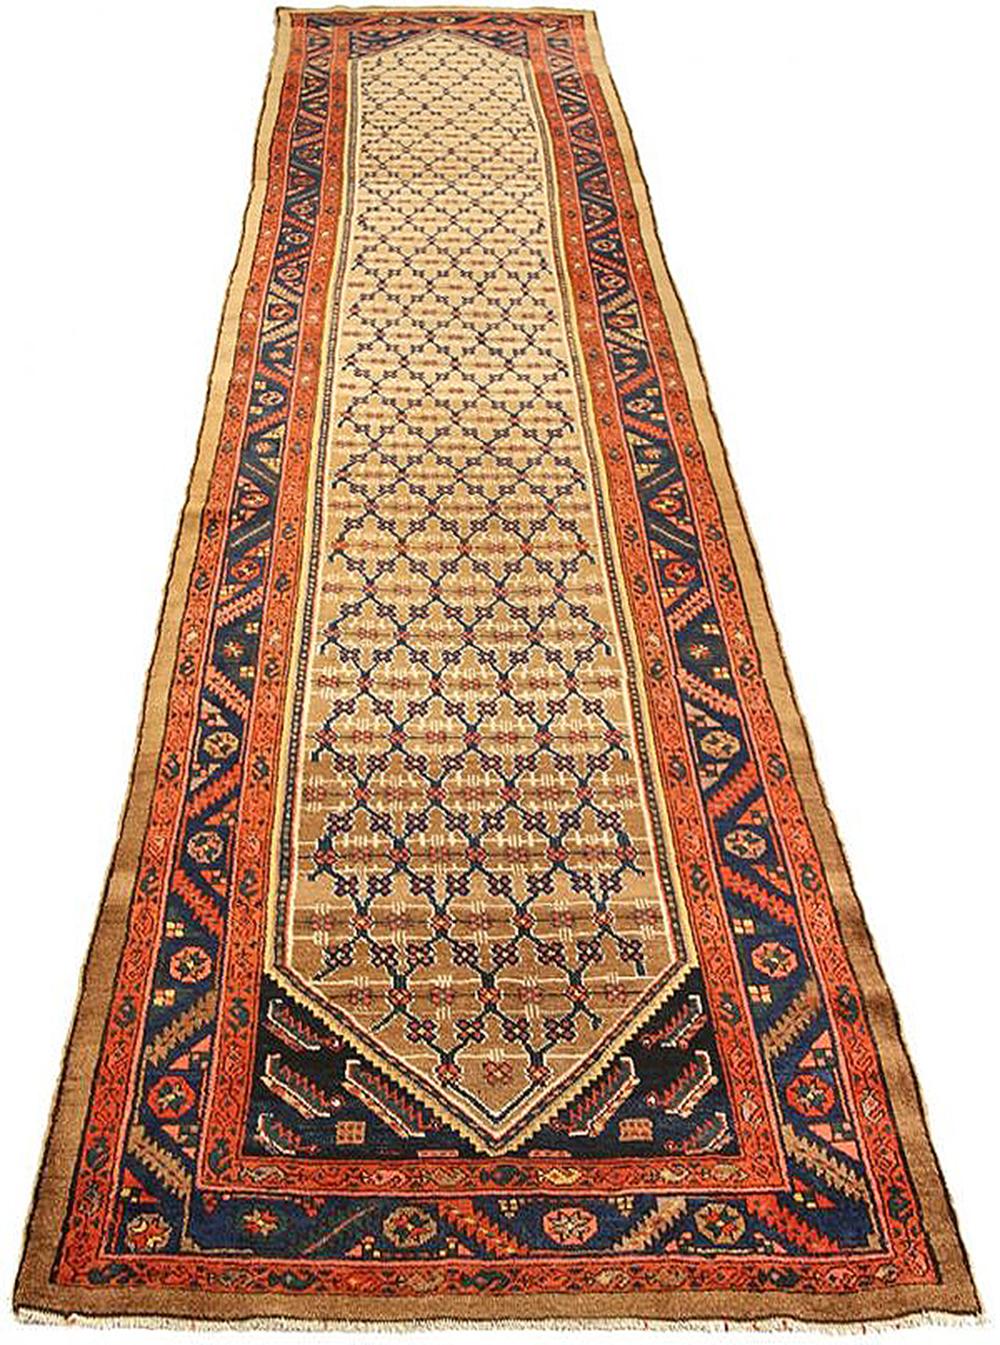 Antique Persian runner rug handwoven from the finest sheep’s wool and colored with all-natural vegetable dyes that are safe for humans and pets. It’s a traditional Sarab design featuring flower details in navy and brown over a beige center field. It